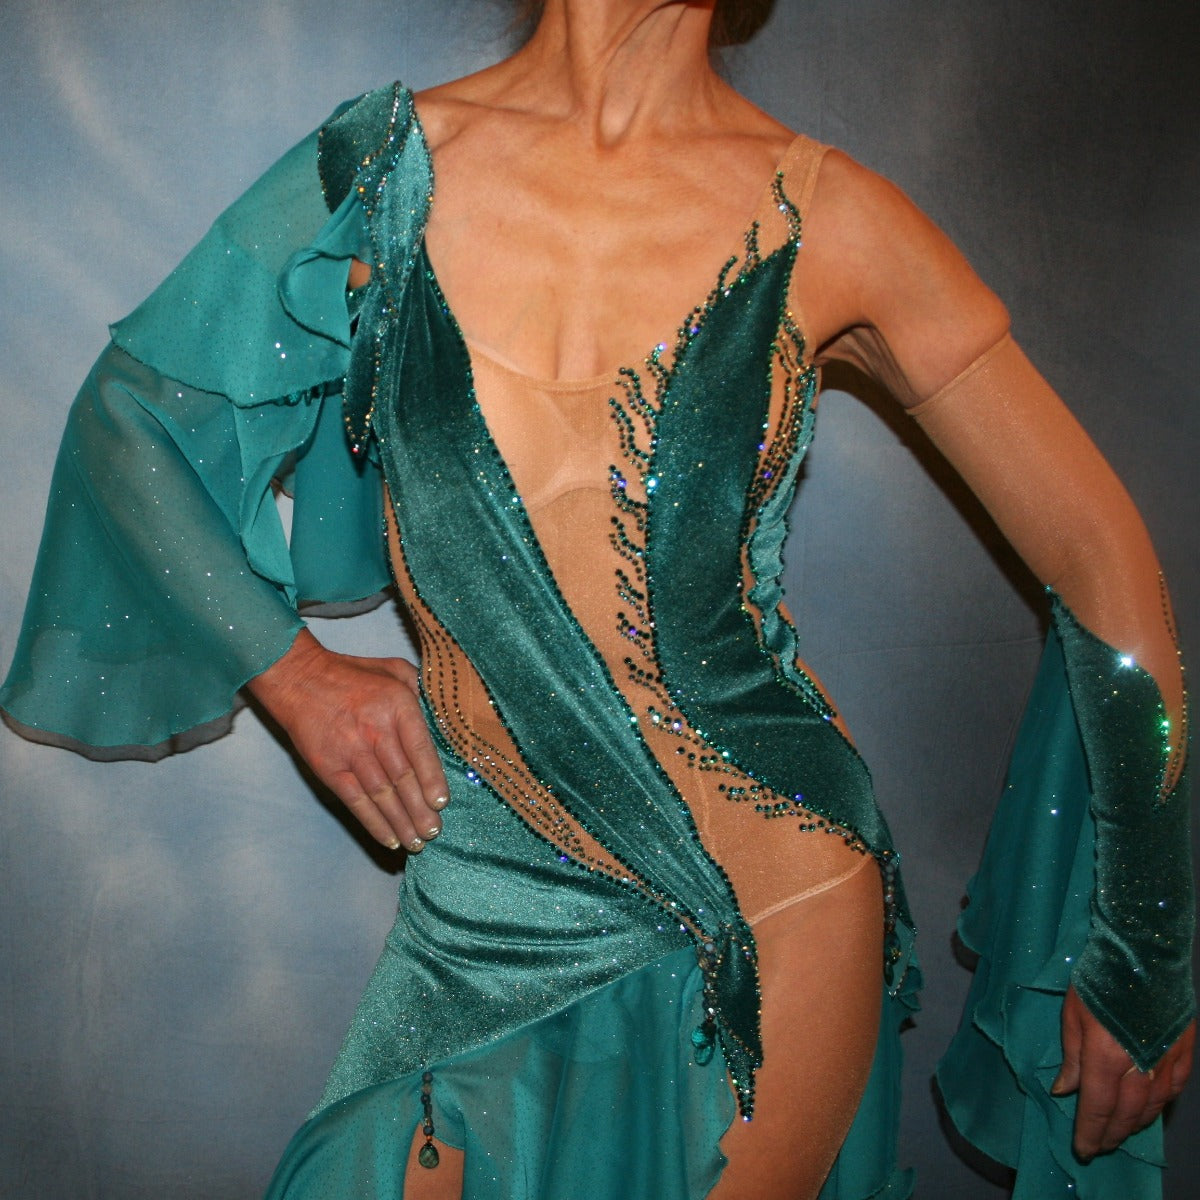 Crystal's Creations close up view of Crystal's Creations close up view of Teal Latin/rhythm dress was created on a nude illusion base with luxurious teal glitter stretch velvet fabric along with flounces of teal glitter chiffon, embellished with blue zircon & blue zircon Ab Swarovski stonework plus hand beaded detailing